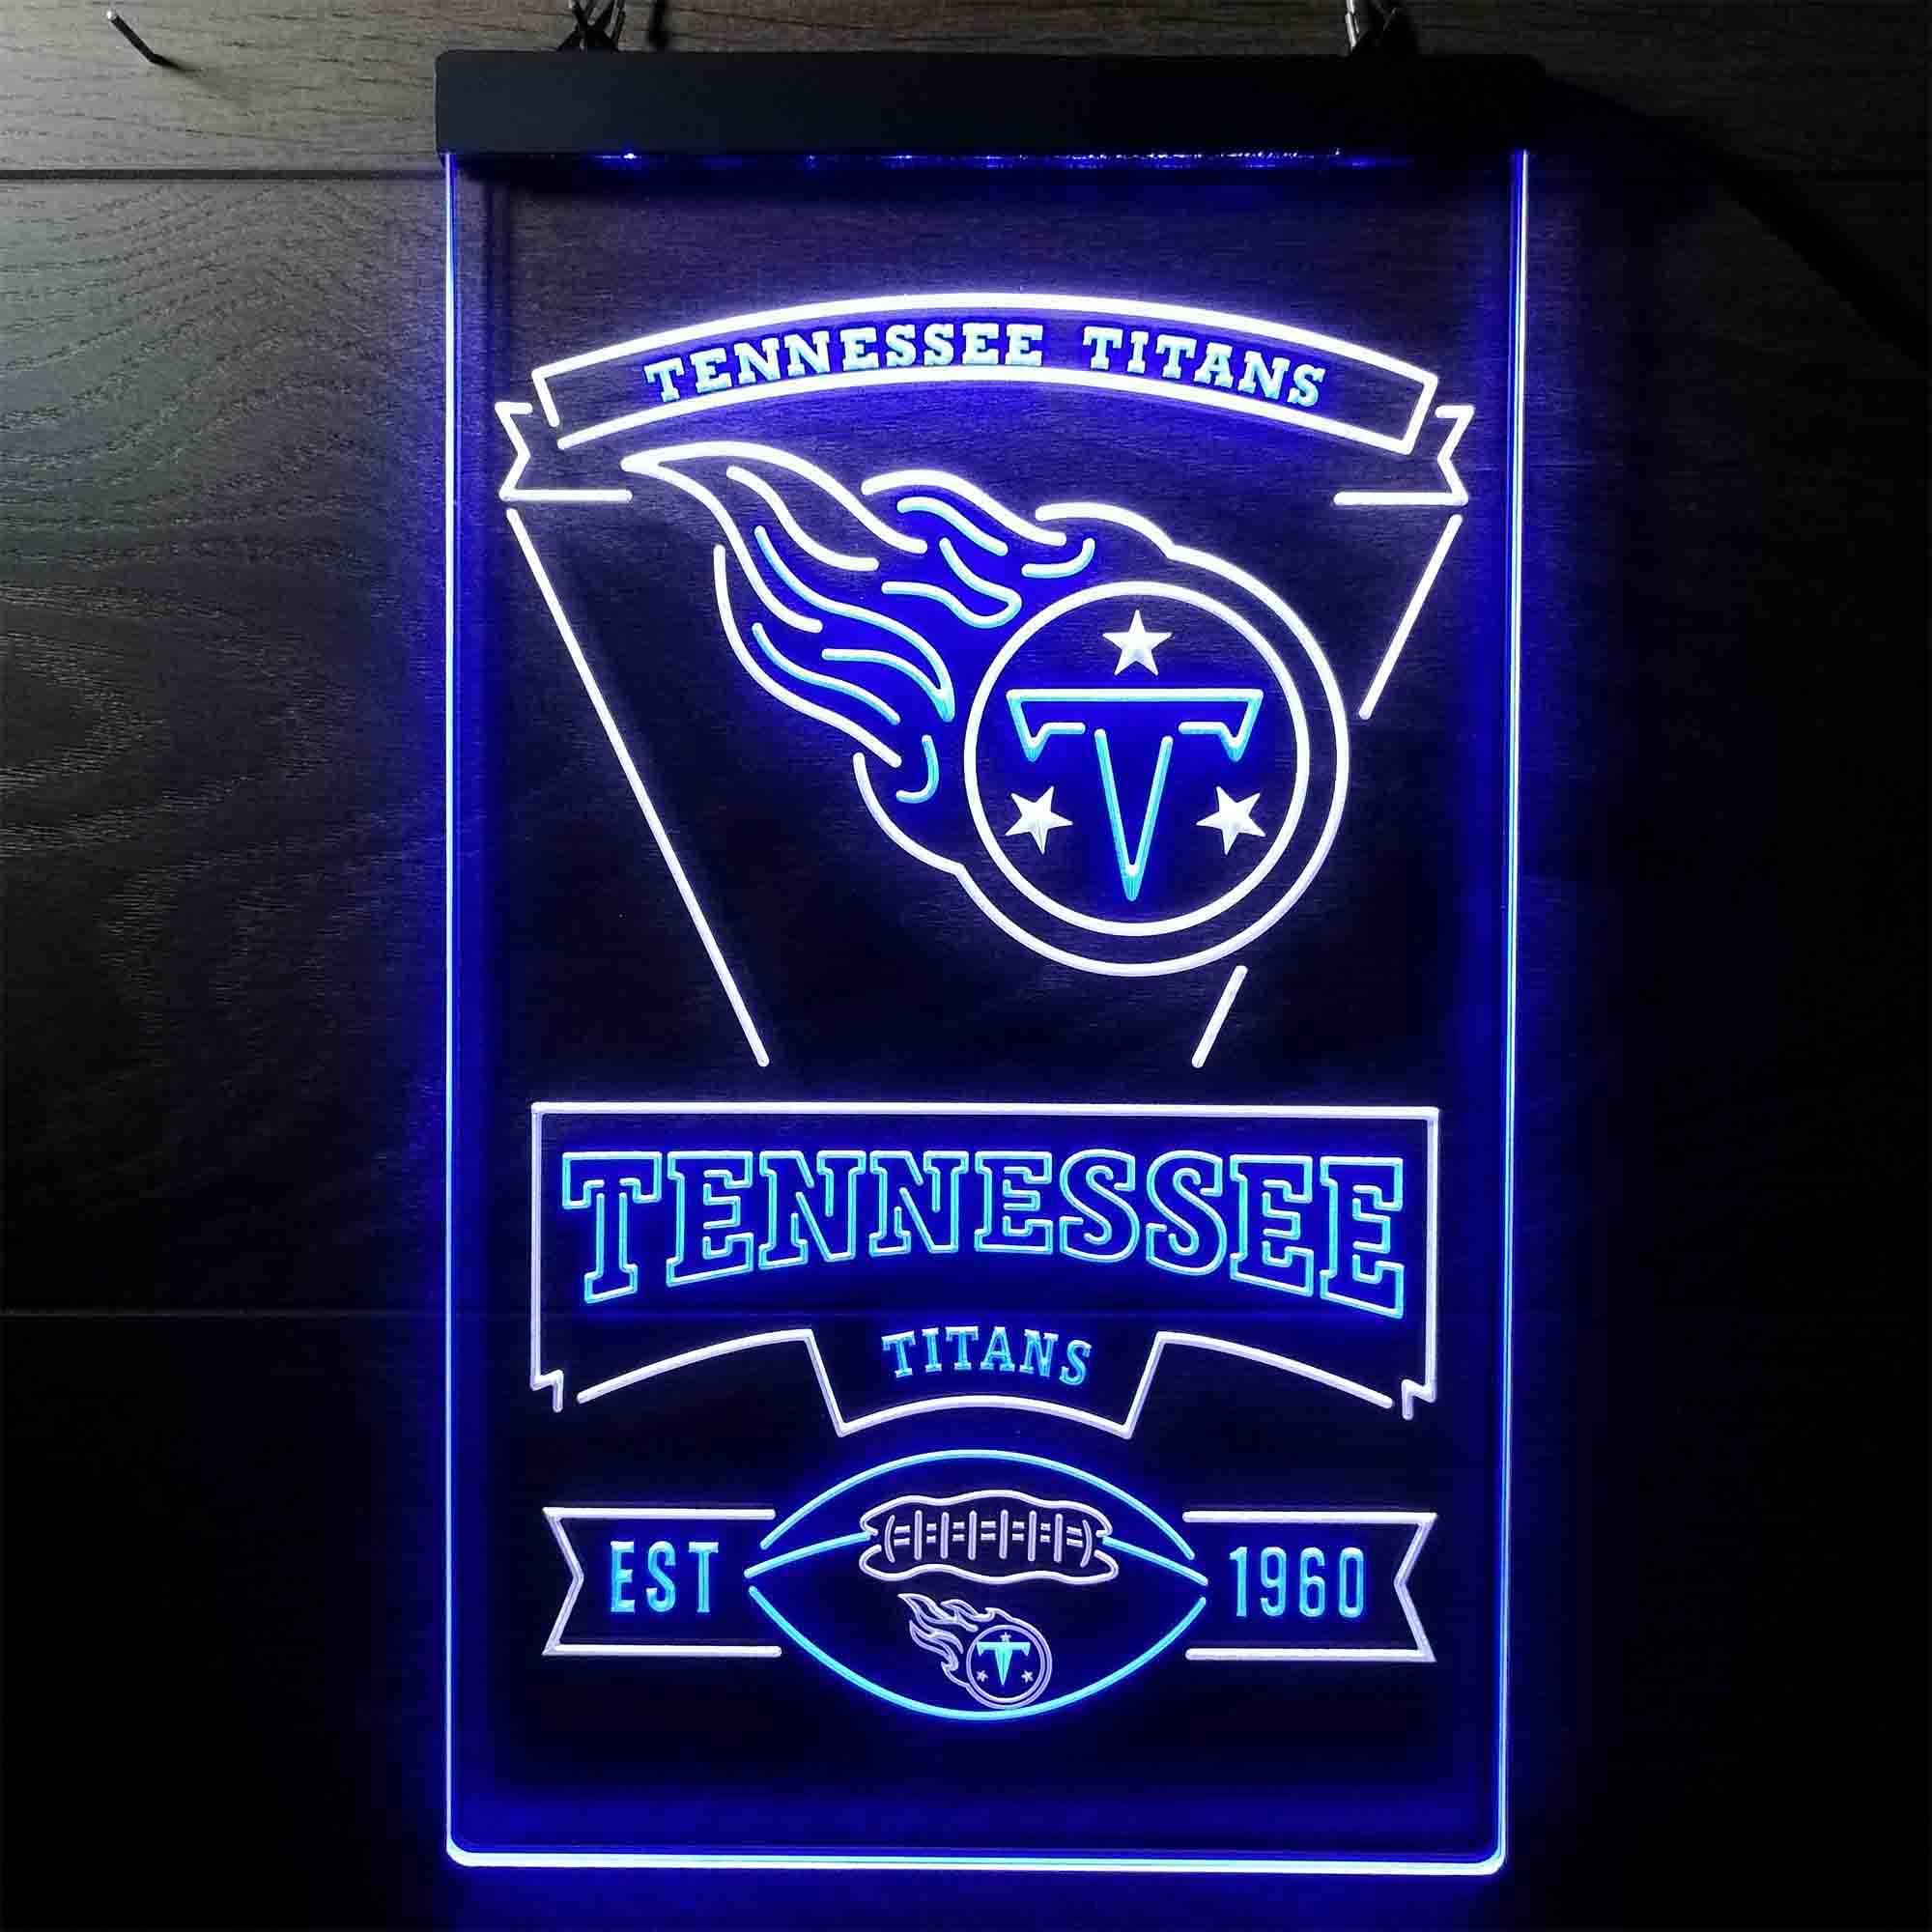 Tennessee Titans EST 1960 Neon LED Sign